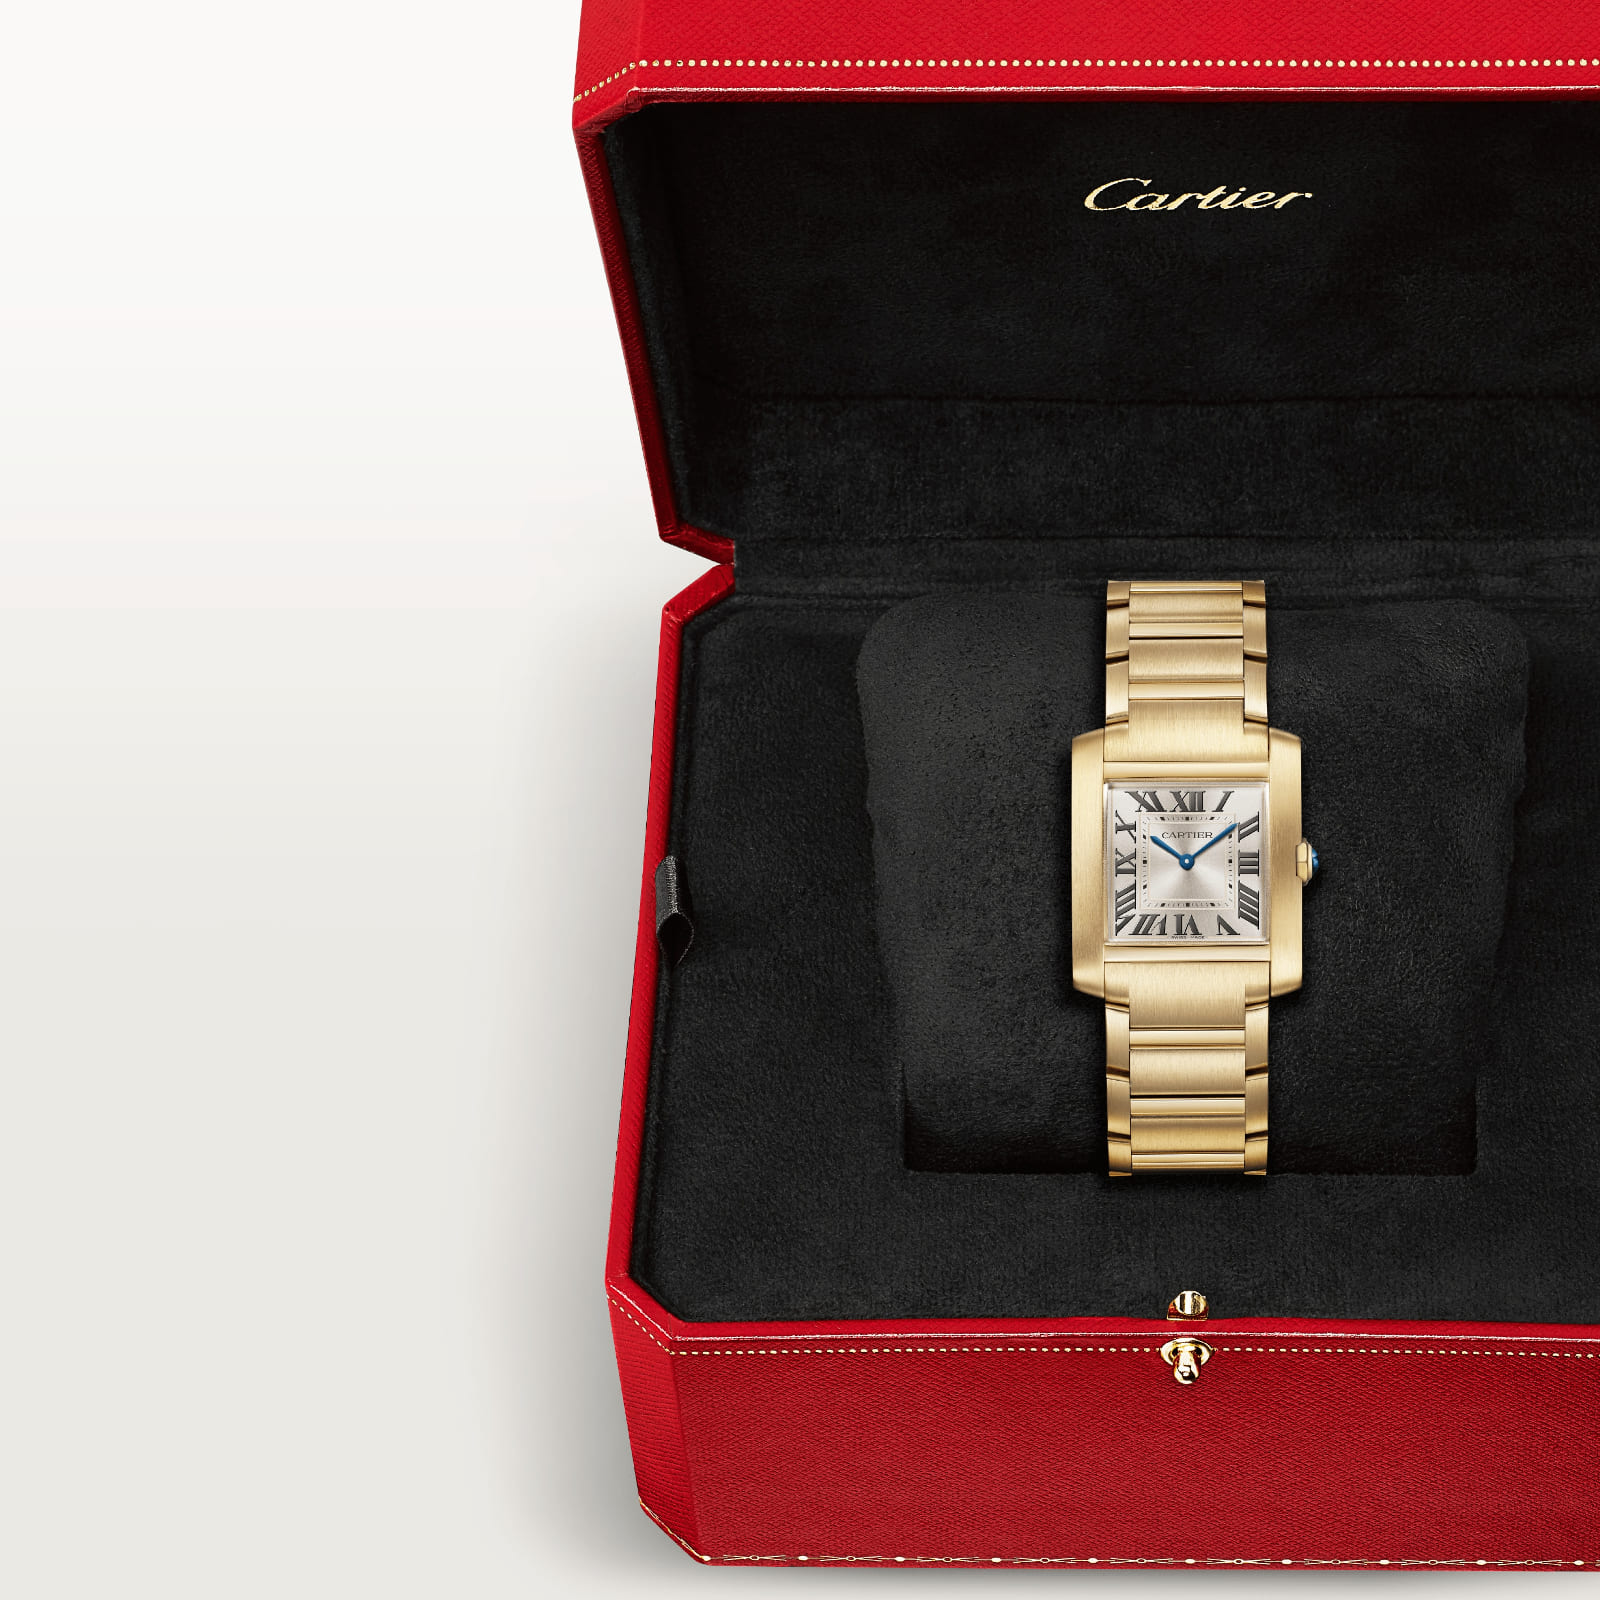 Cartier Tank Francaise Mittleres Modell in Cartier Verpackung